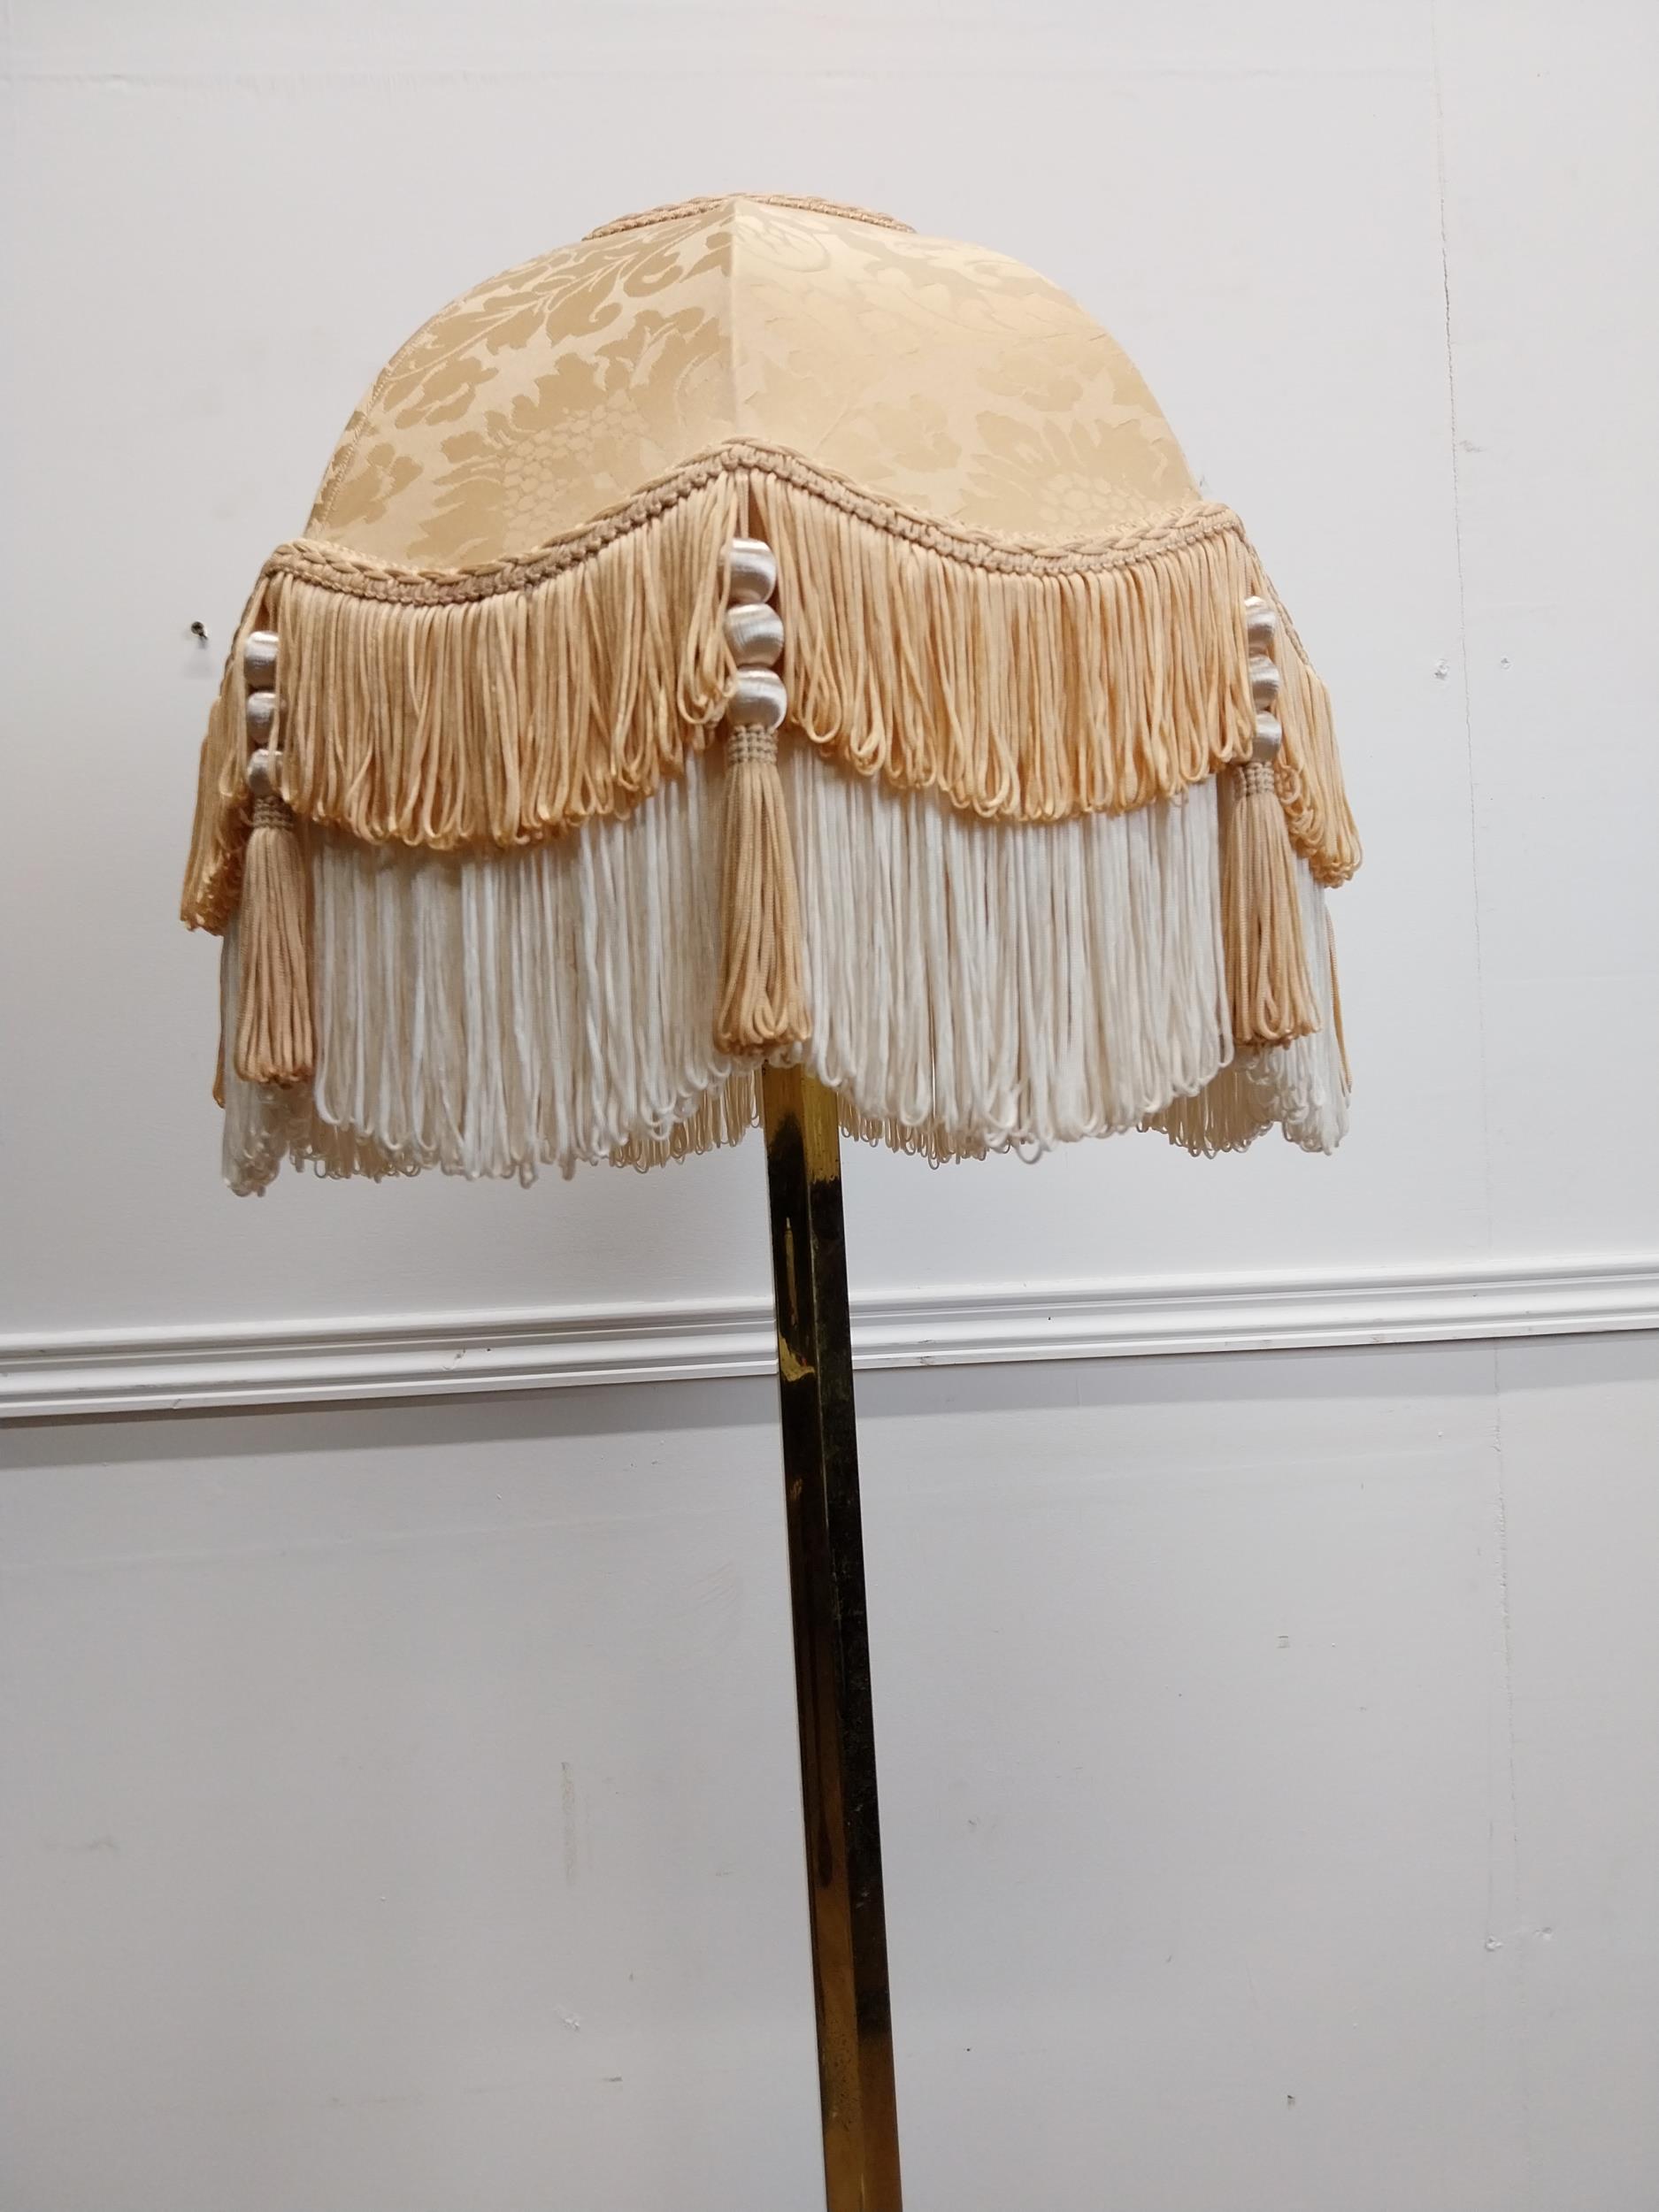 Edwardian brass standard lamp with cloth shade {140 cm H x 40 cm Dia.}. - Image 3 of 3